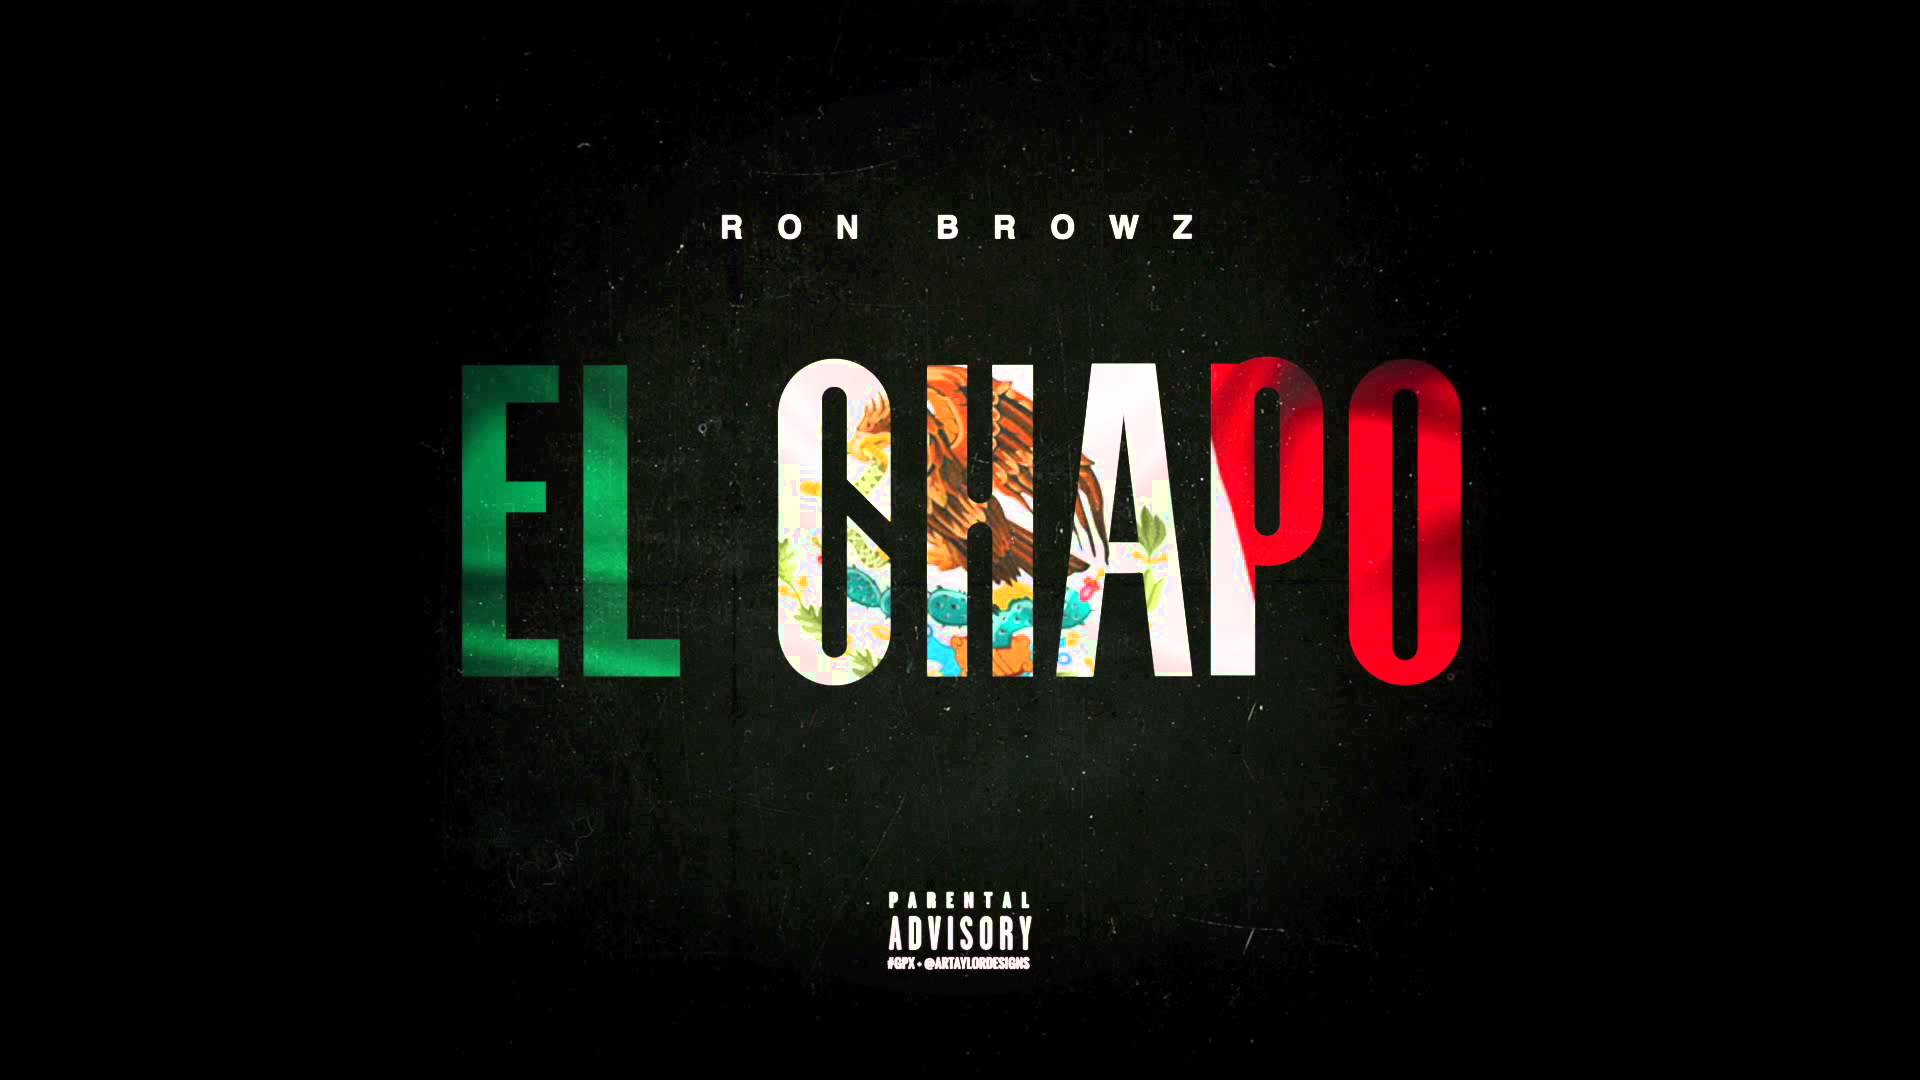 Ron Browz Chapo (Clean) OFFICIAL VERSION